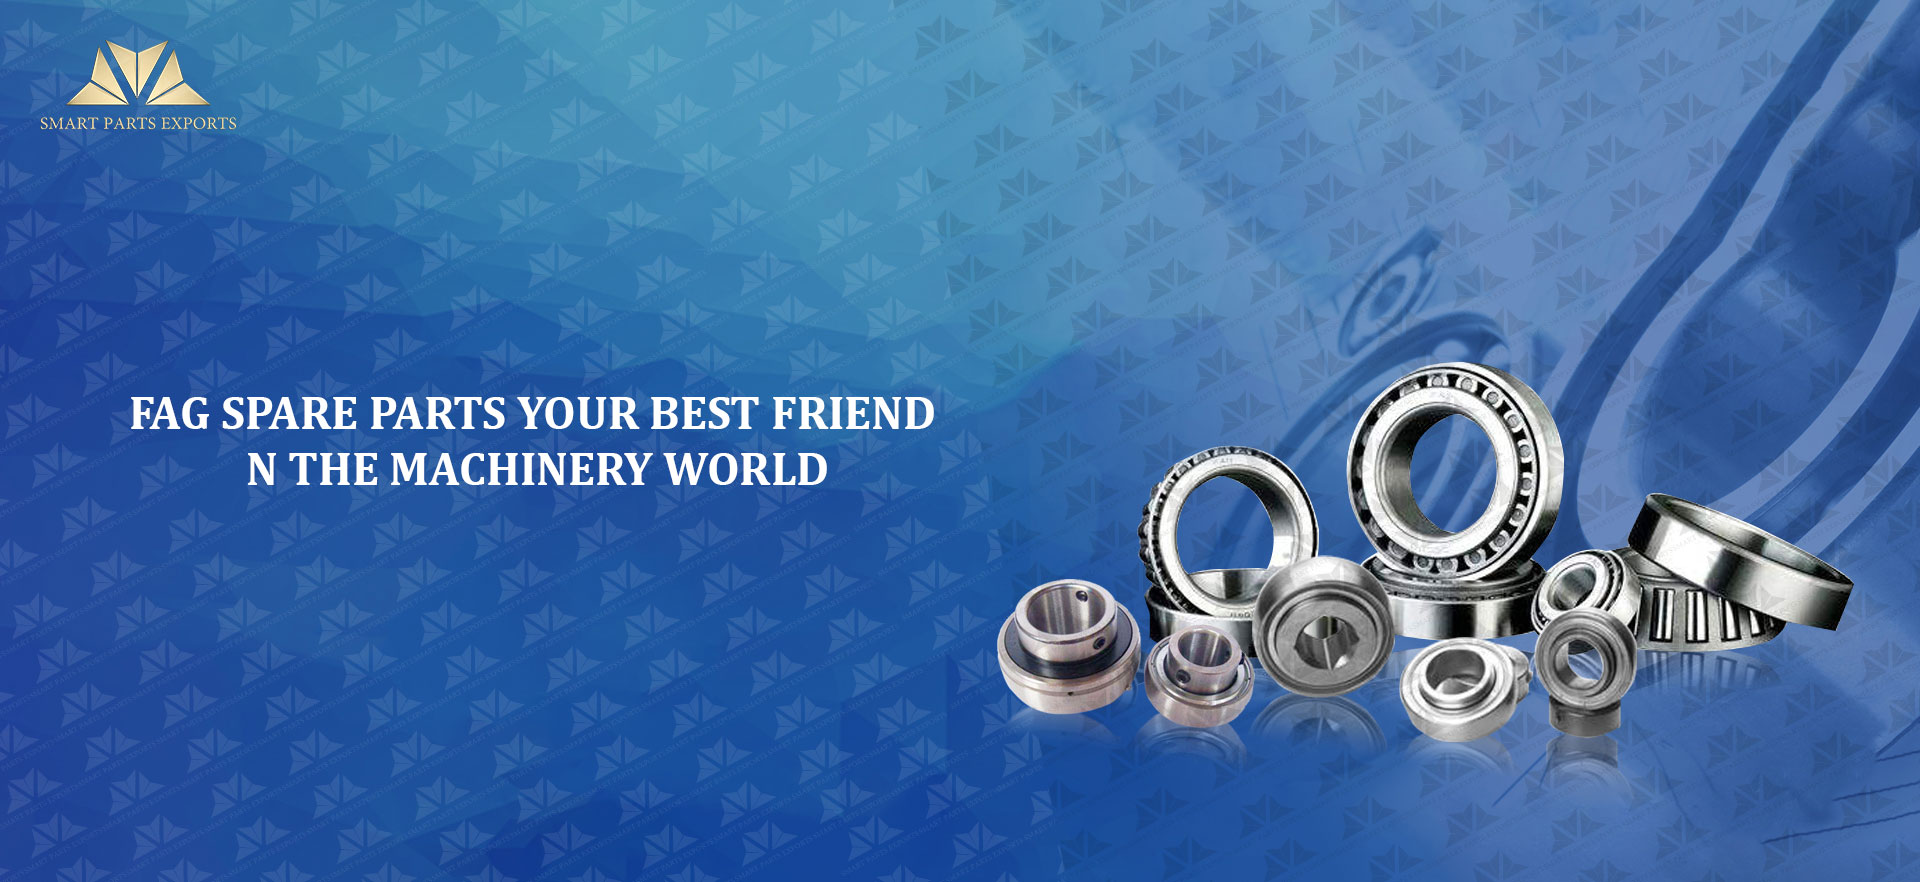 FAG Spare Parts - Your Best Friend in the Machinery World